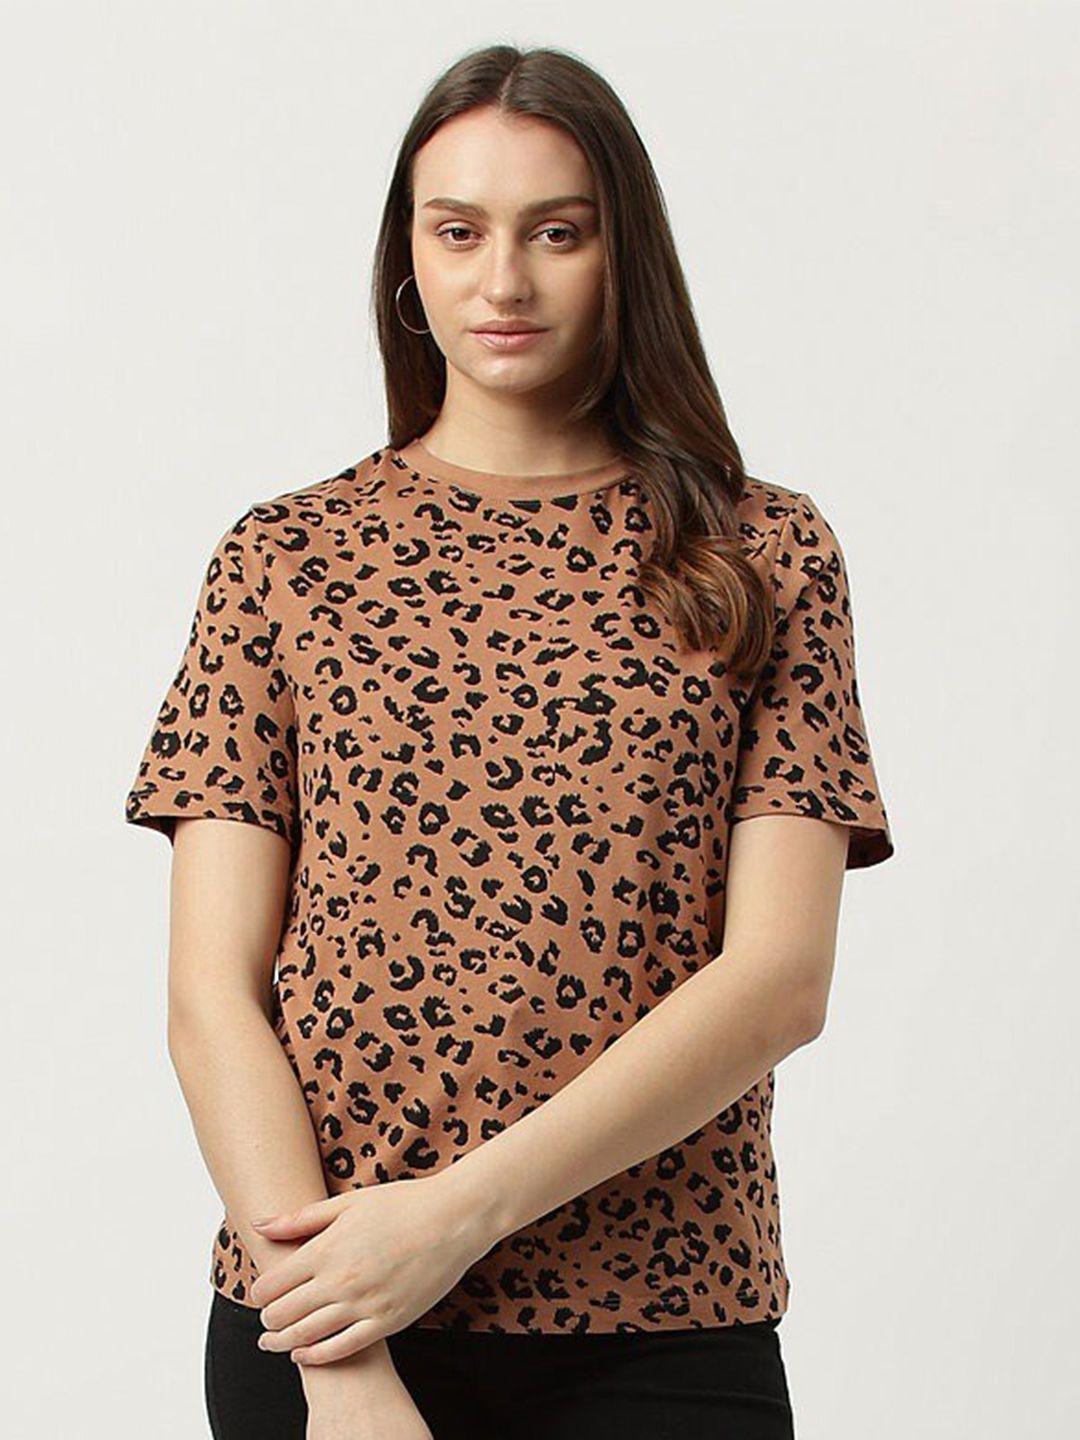 marks & spencer animal printed pure cotton t-shirt